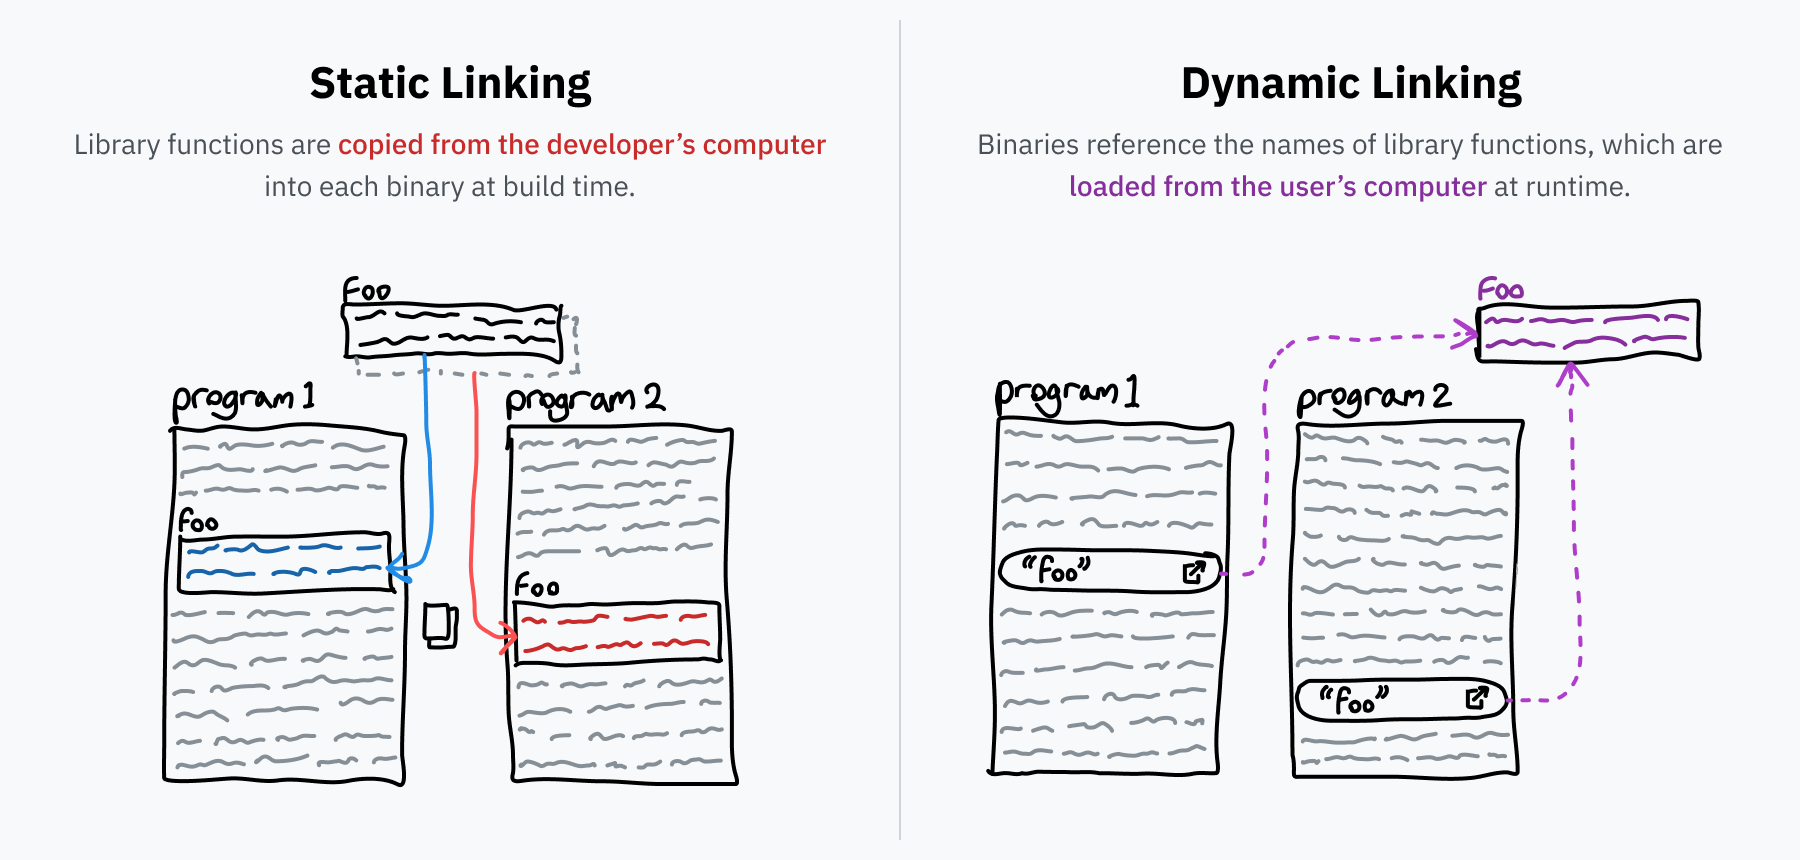 A diagram showing the difference between static and dynamic linking. On the left, static linking is shown with the contents of some code called "foo" being separately copied into two programs. This is accompanied with text saying that library functions are copied from the developer's computer into each binary at built time. On the right side, dynamic linking is shown: each program contains the name of the "foo" function, with arrows pointing outside the programs into the foo program lying on the user's computer. This is paired with accompanying text stating that binaries reference the names of library functions, which are loaded from the user's computer at runtime.